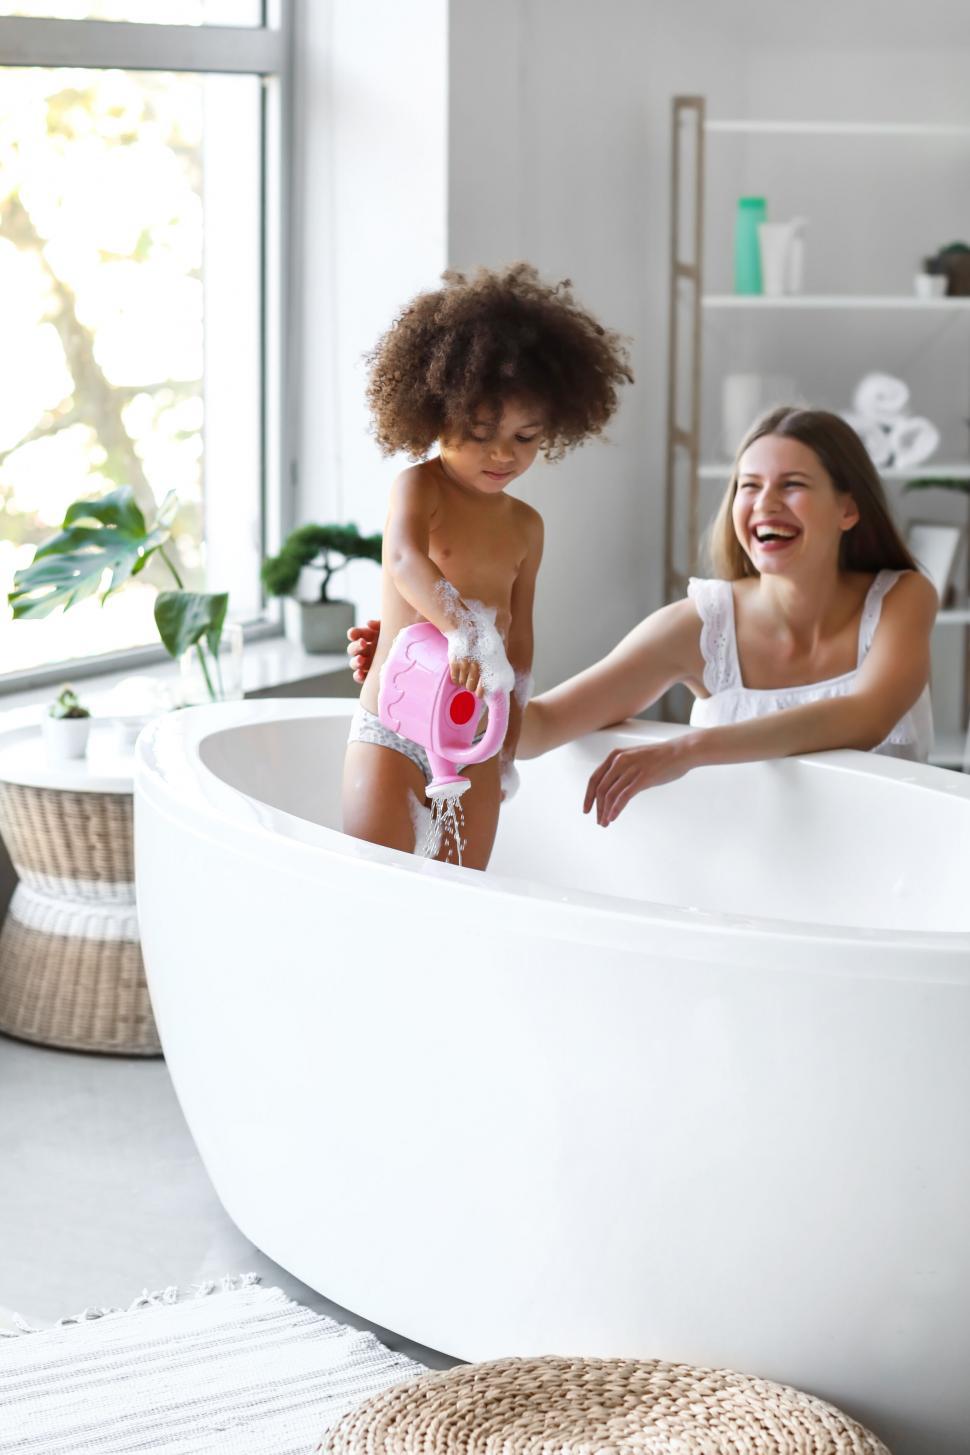 Free Image of Playful mother and daughter during bath 